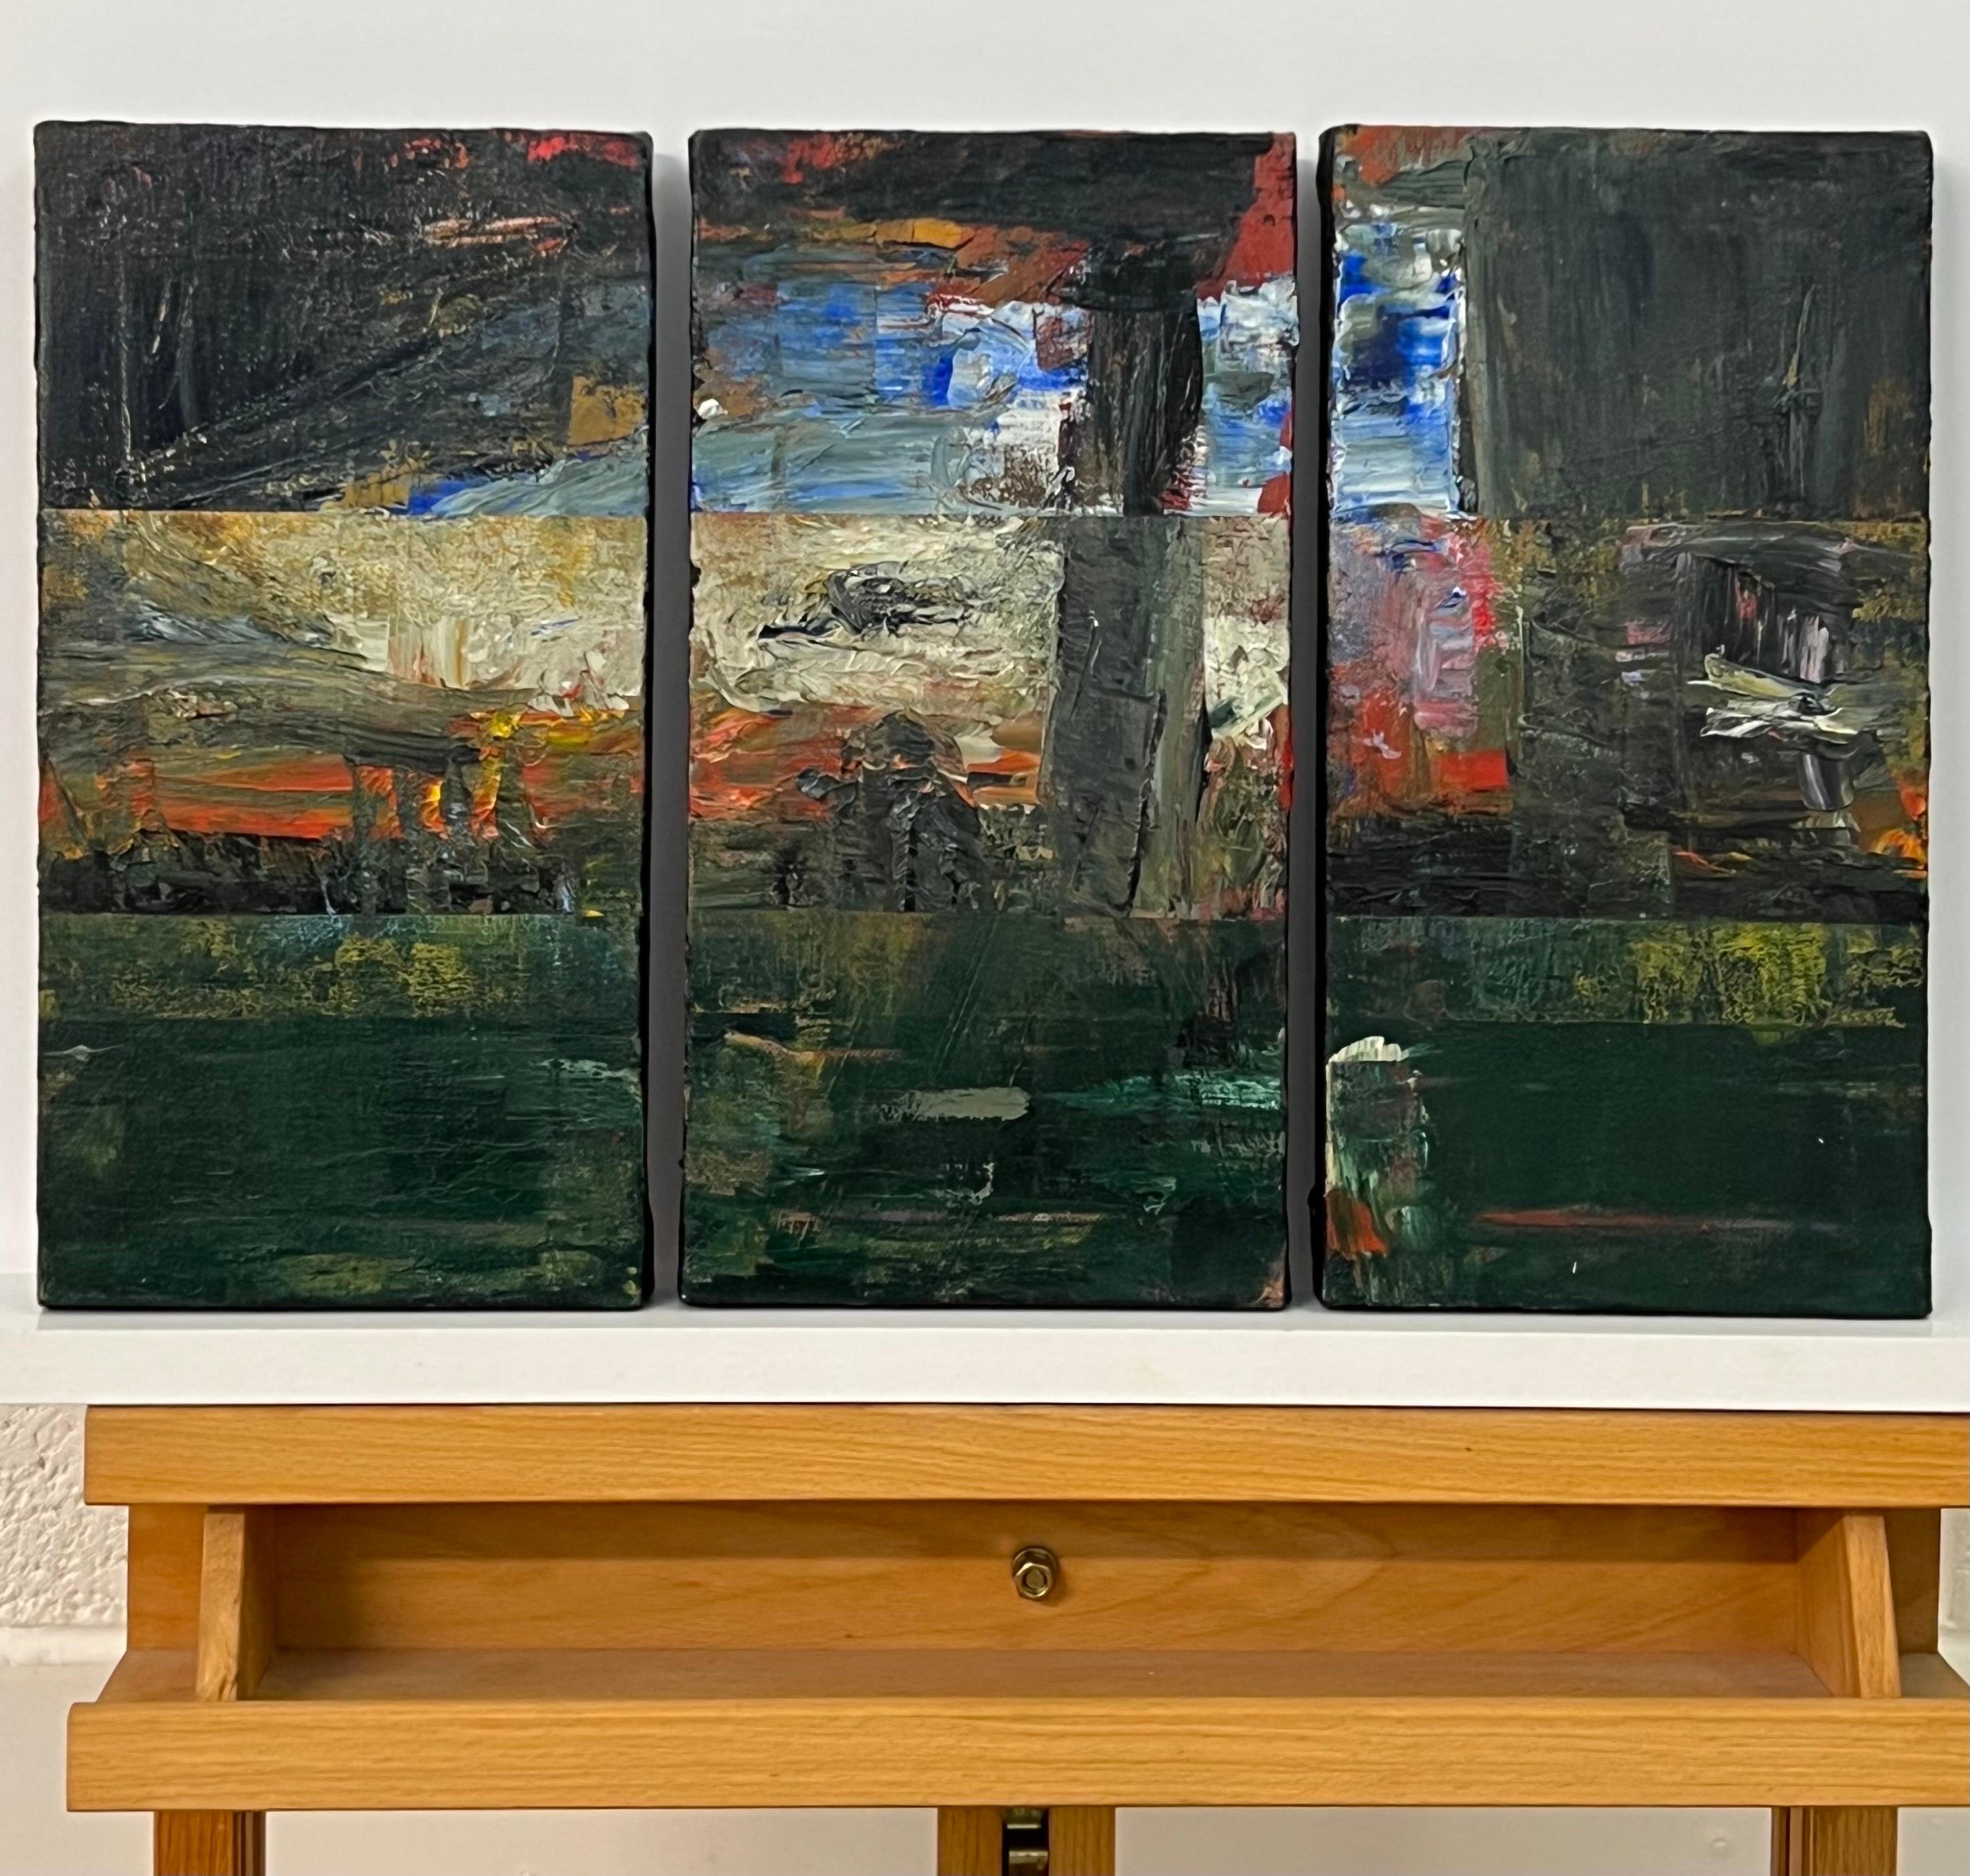 Small Early Triptych Study of Abstract Trees Forest Landscape Painting by British Urban Artist. This rare early work is from an intense body of abstract work that formed the very foundations of her output as a professional artist. Art critics regard